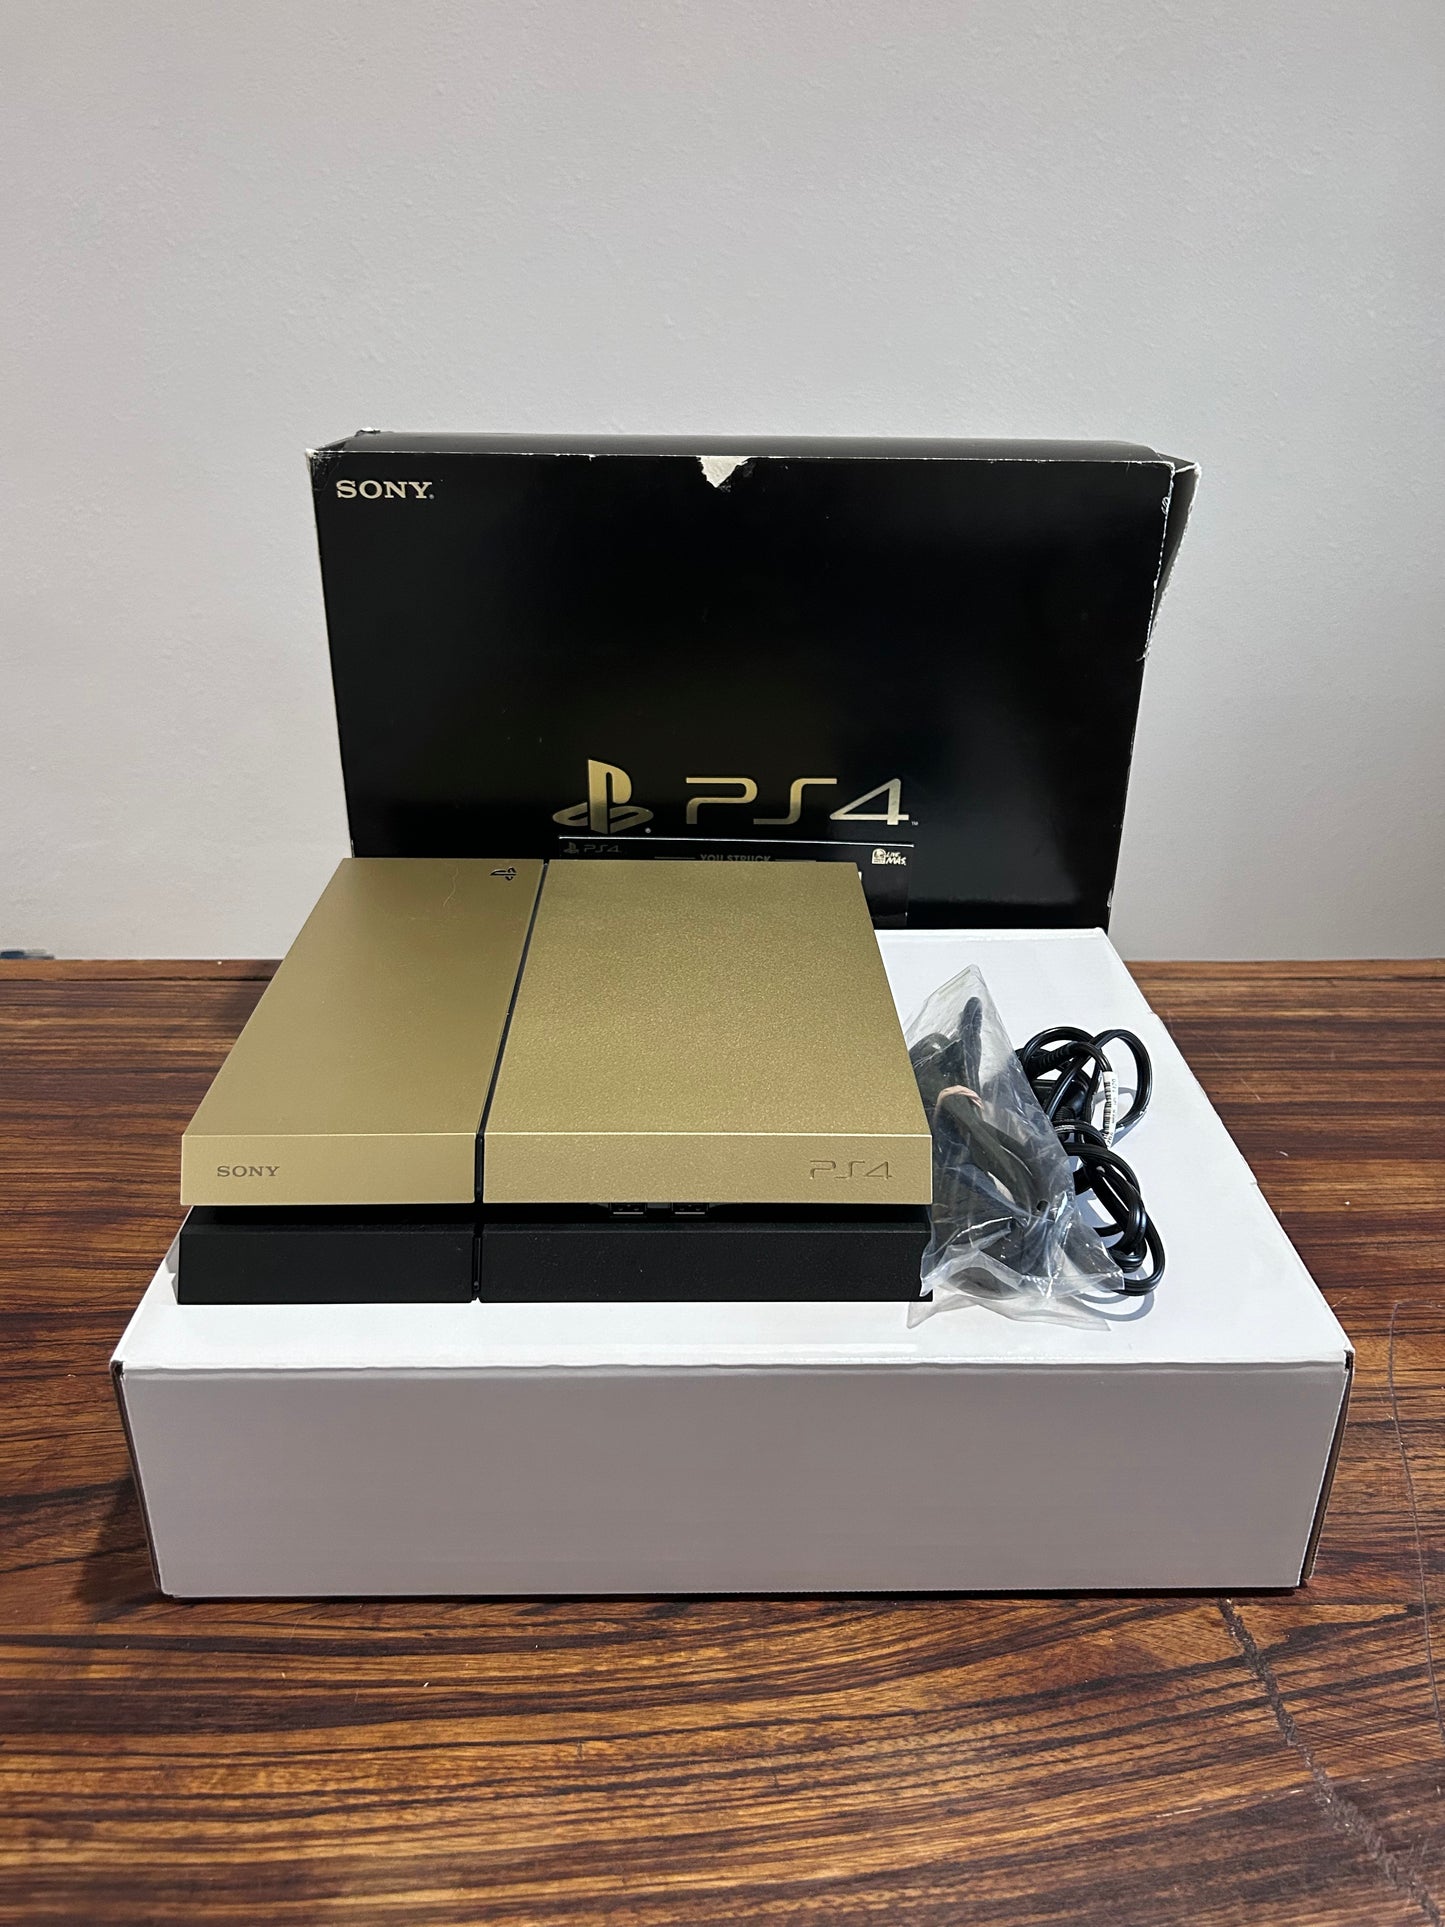 PS4 Taco Bell Gold Console